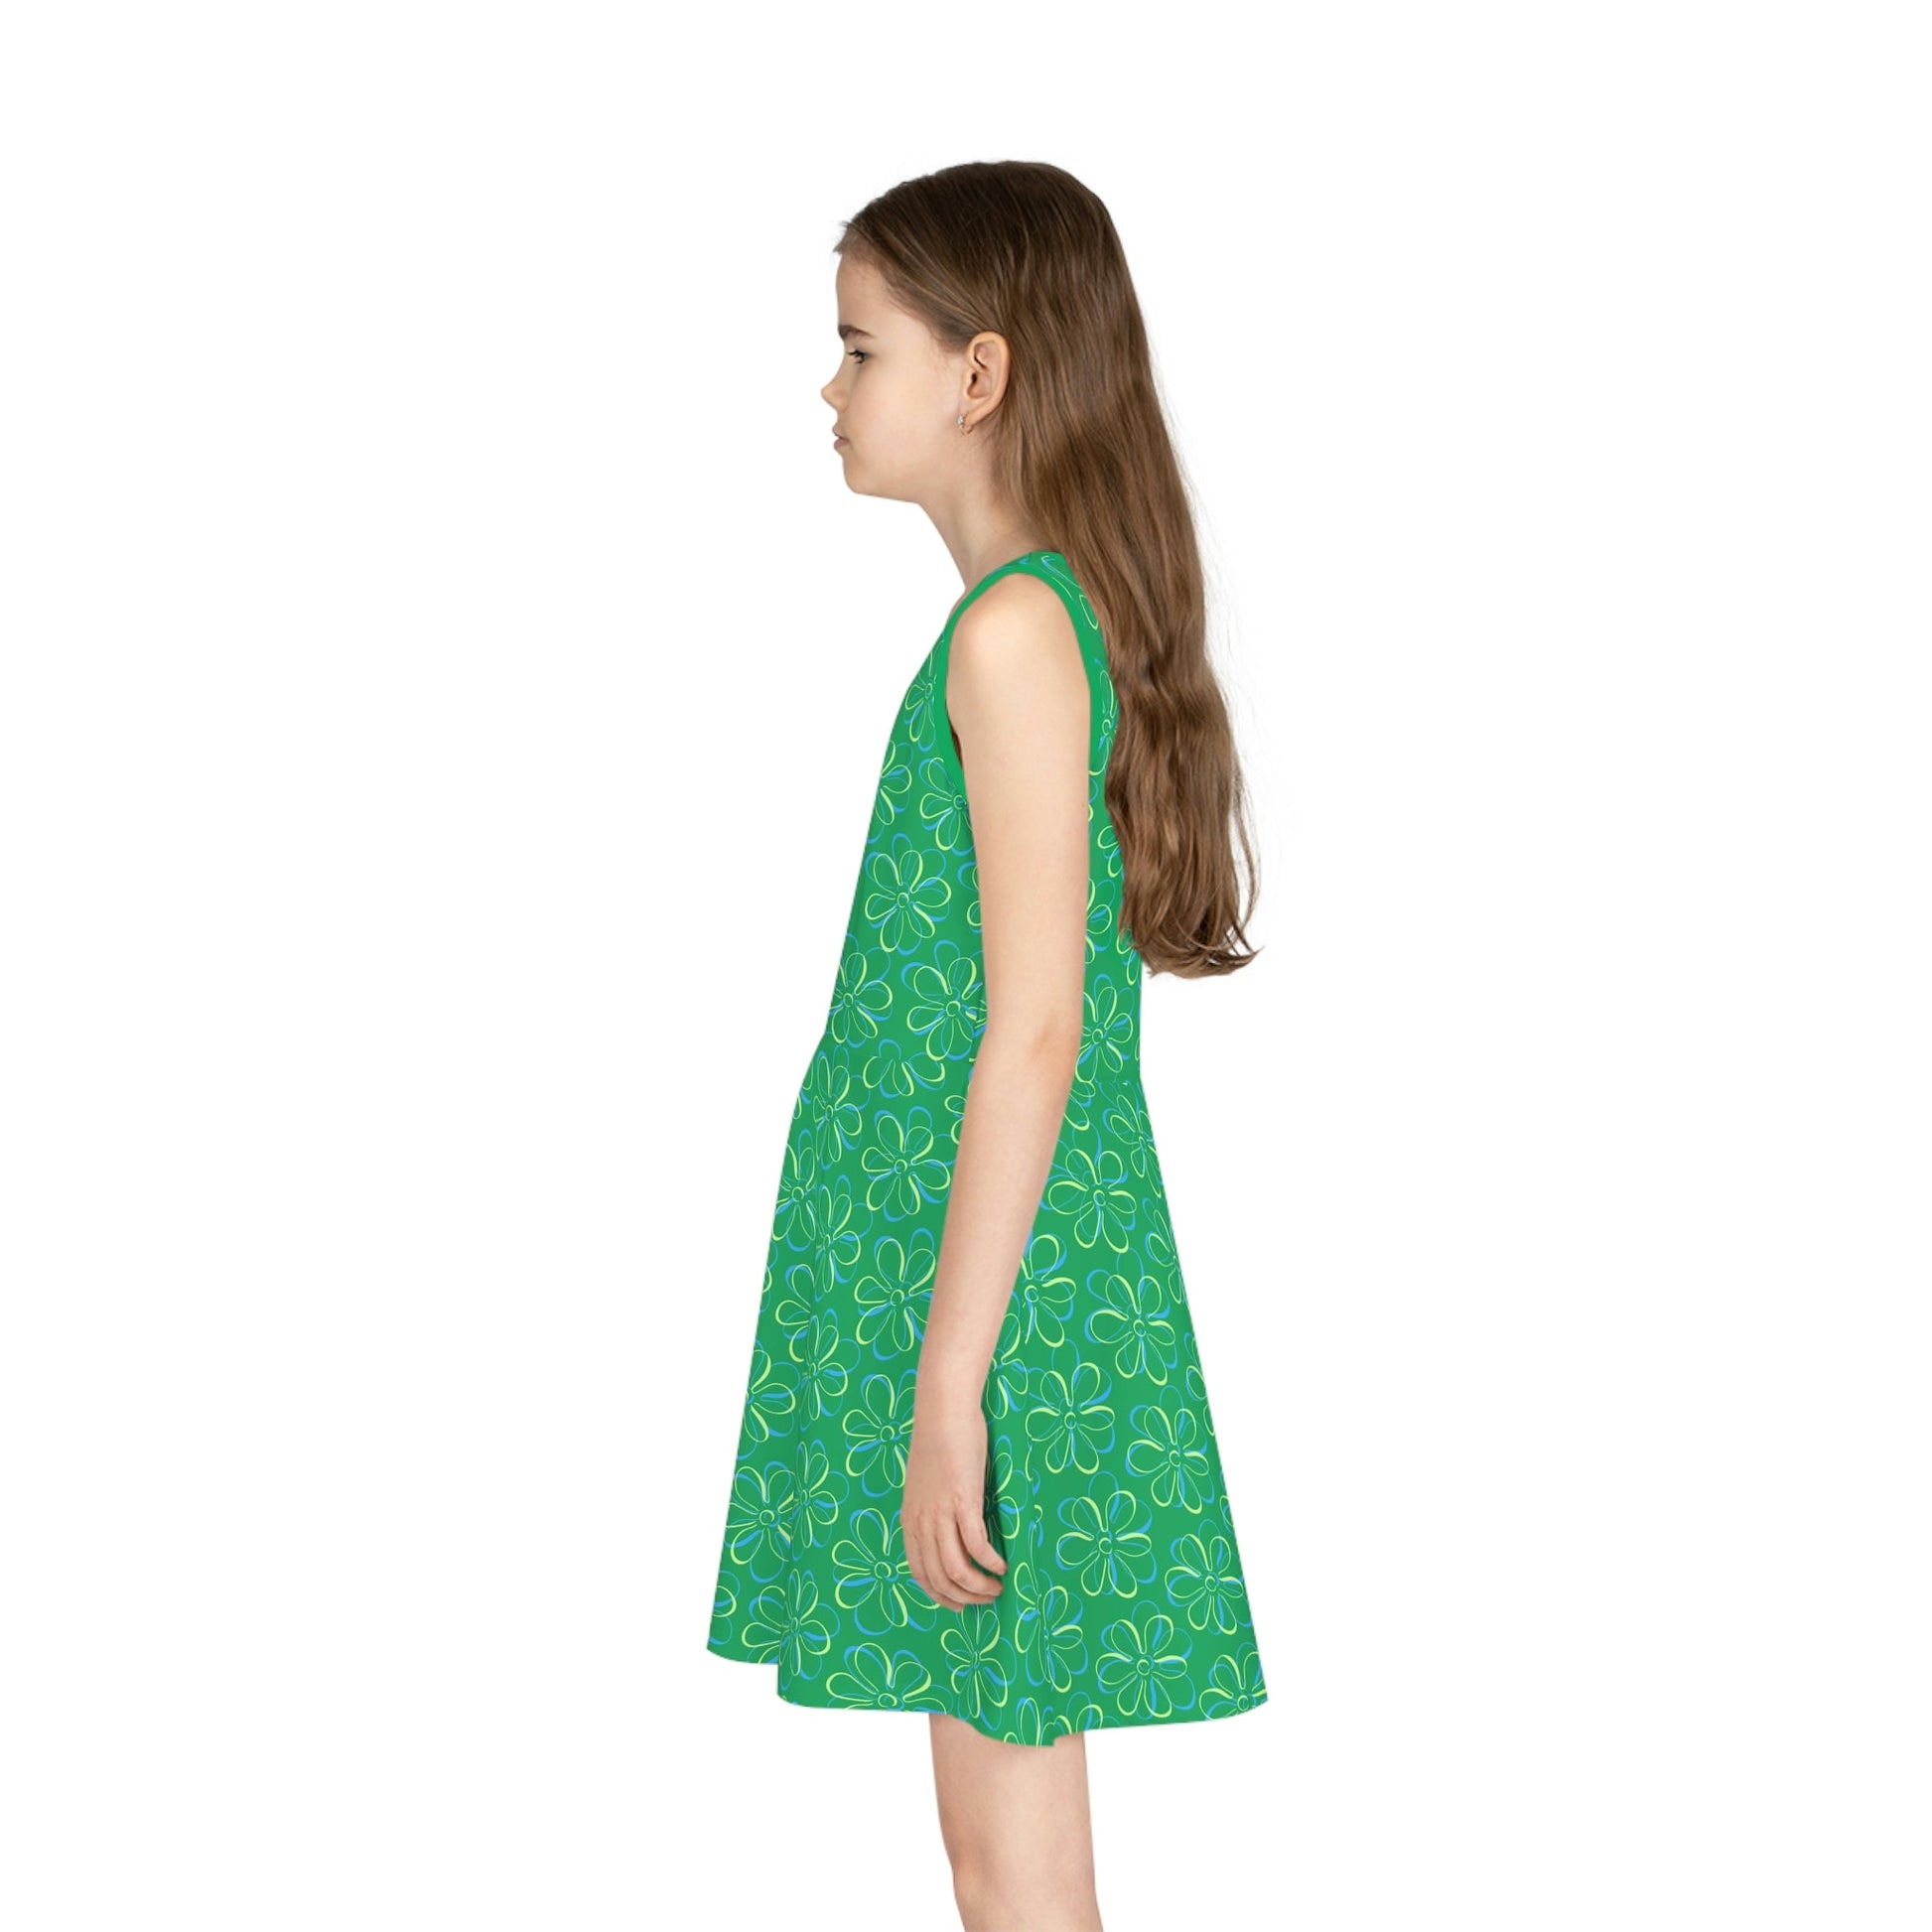 Disgust Girls' Sleeveless Sundress All Over PrintAOPAOP Clothing#tag4##tag5##tag6#